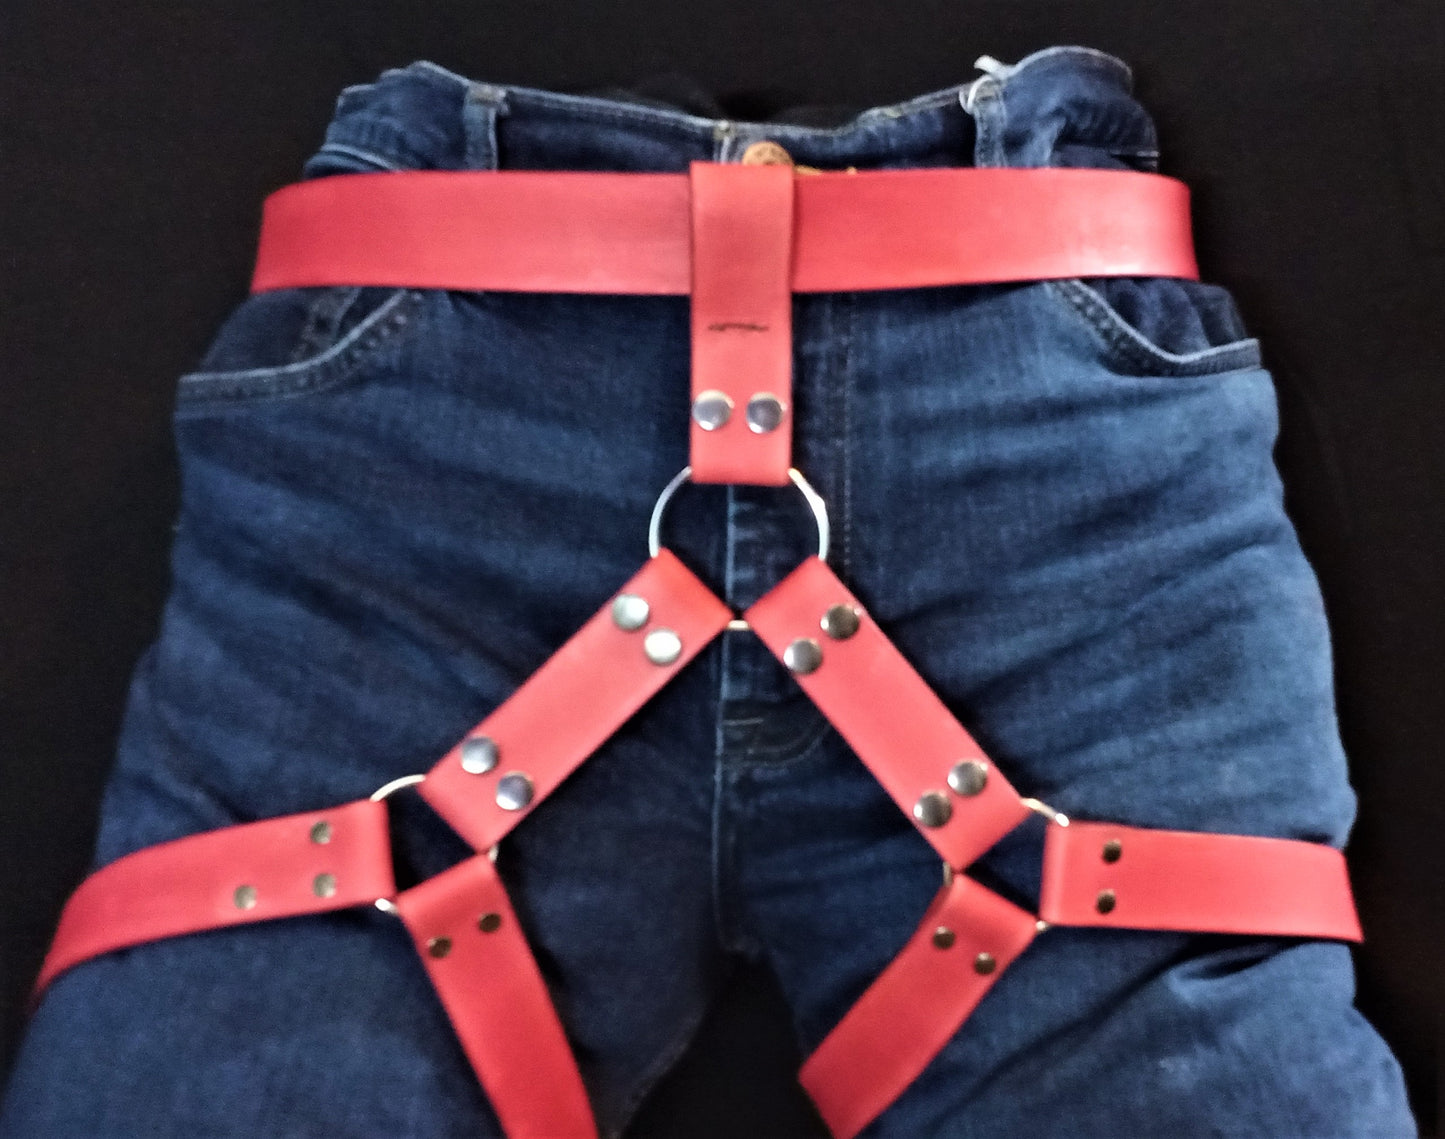 Leather Harness Type 2 - Removable Ring - Blue with Black/Silver Hardware